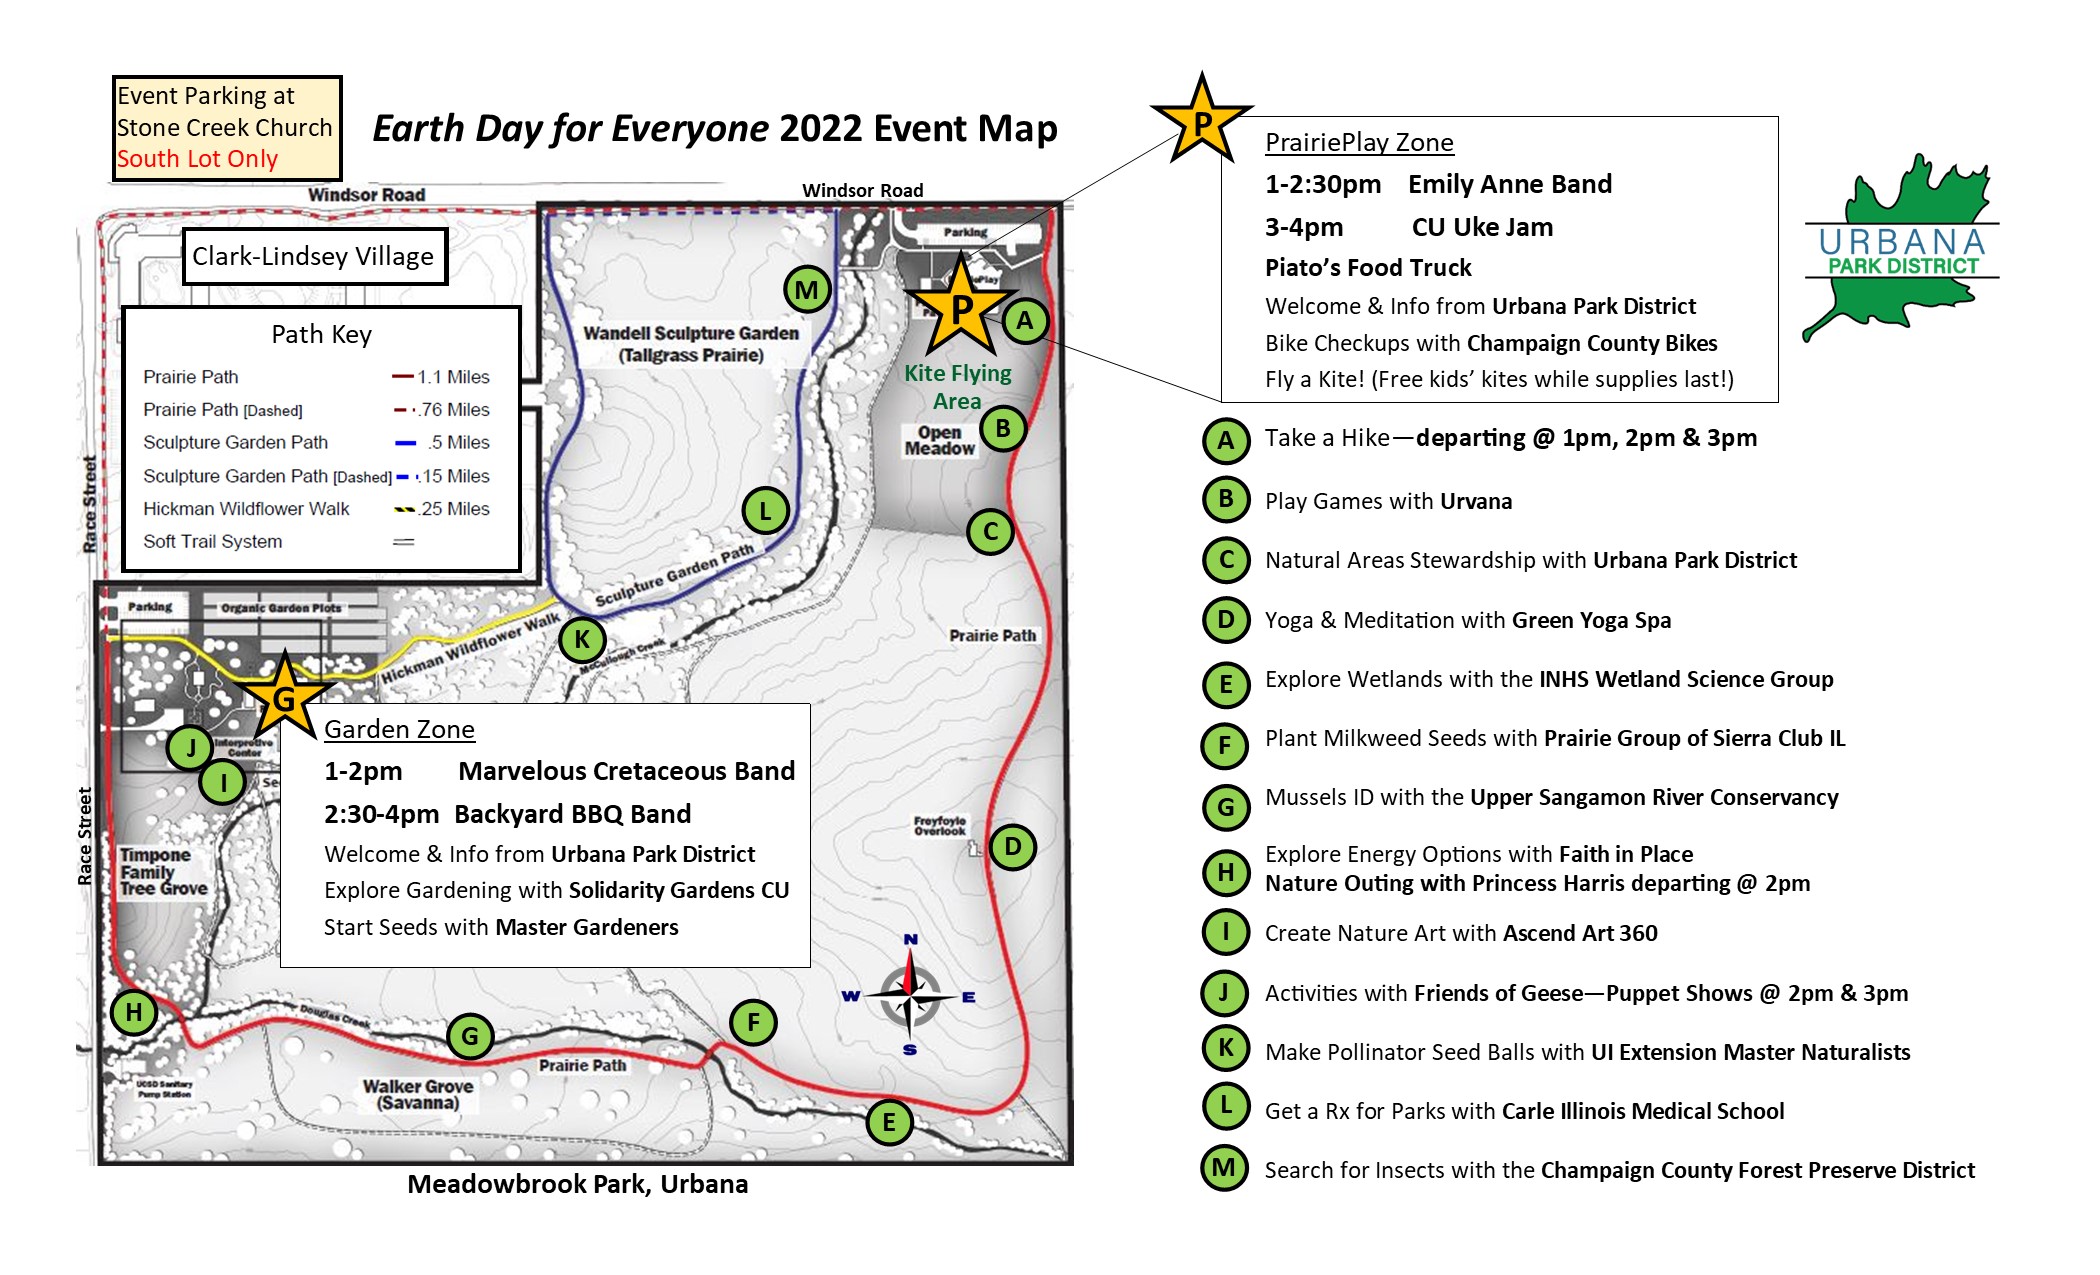 Earth_Day_event_map_2022_Meadowbrook_FINAL